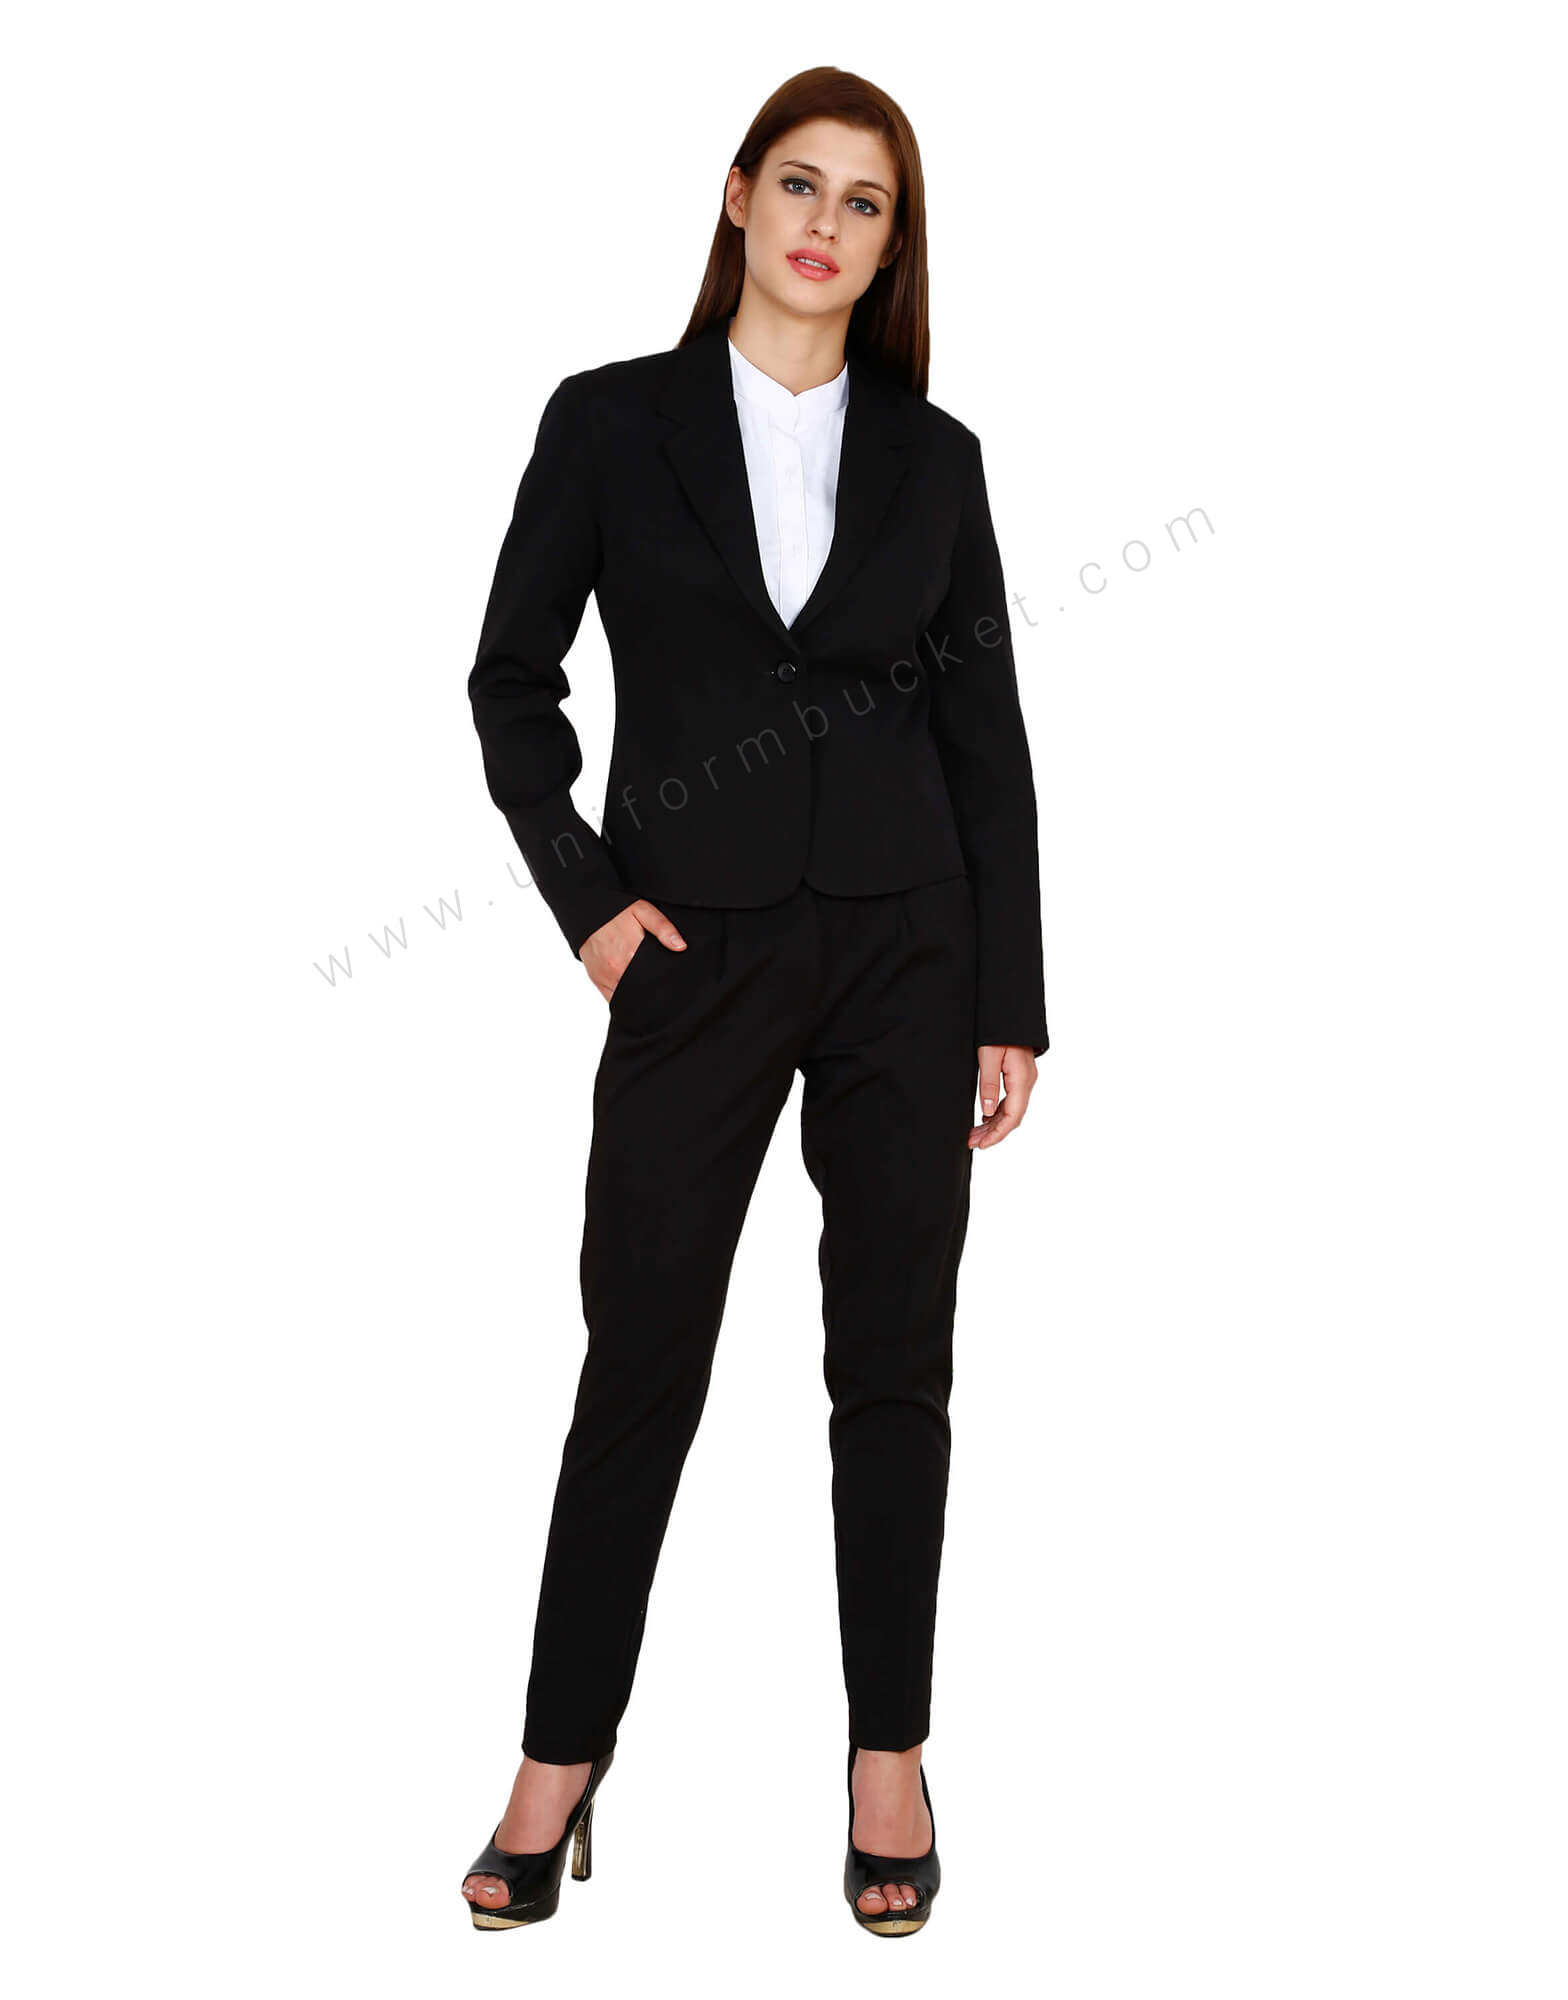 Maolijer Women's Open Front Buttons Work Office Blazer Casual Business Jacket Suit with Pockets 